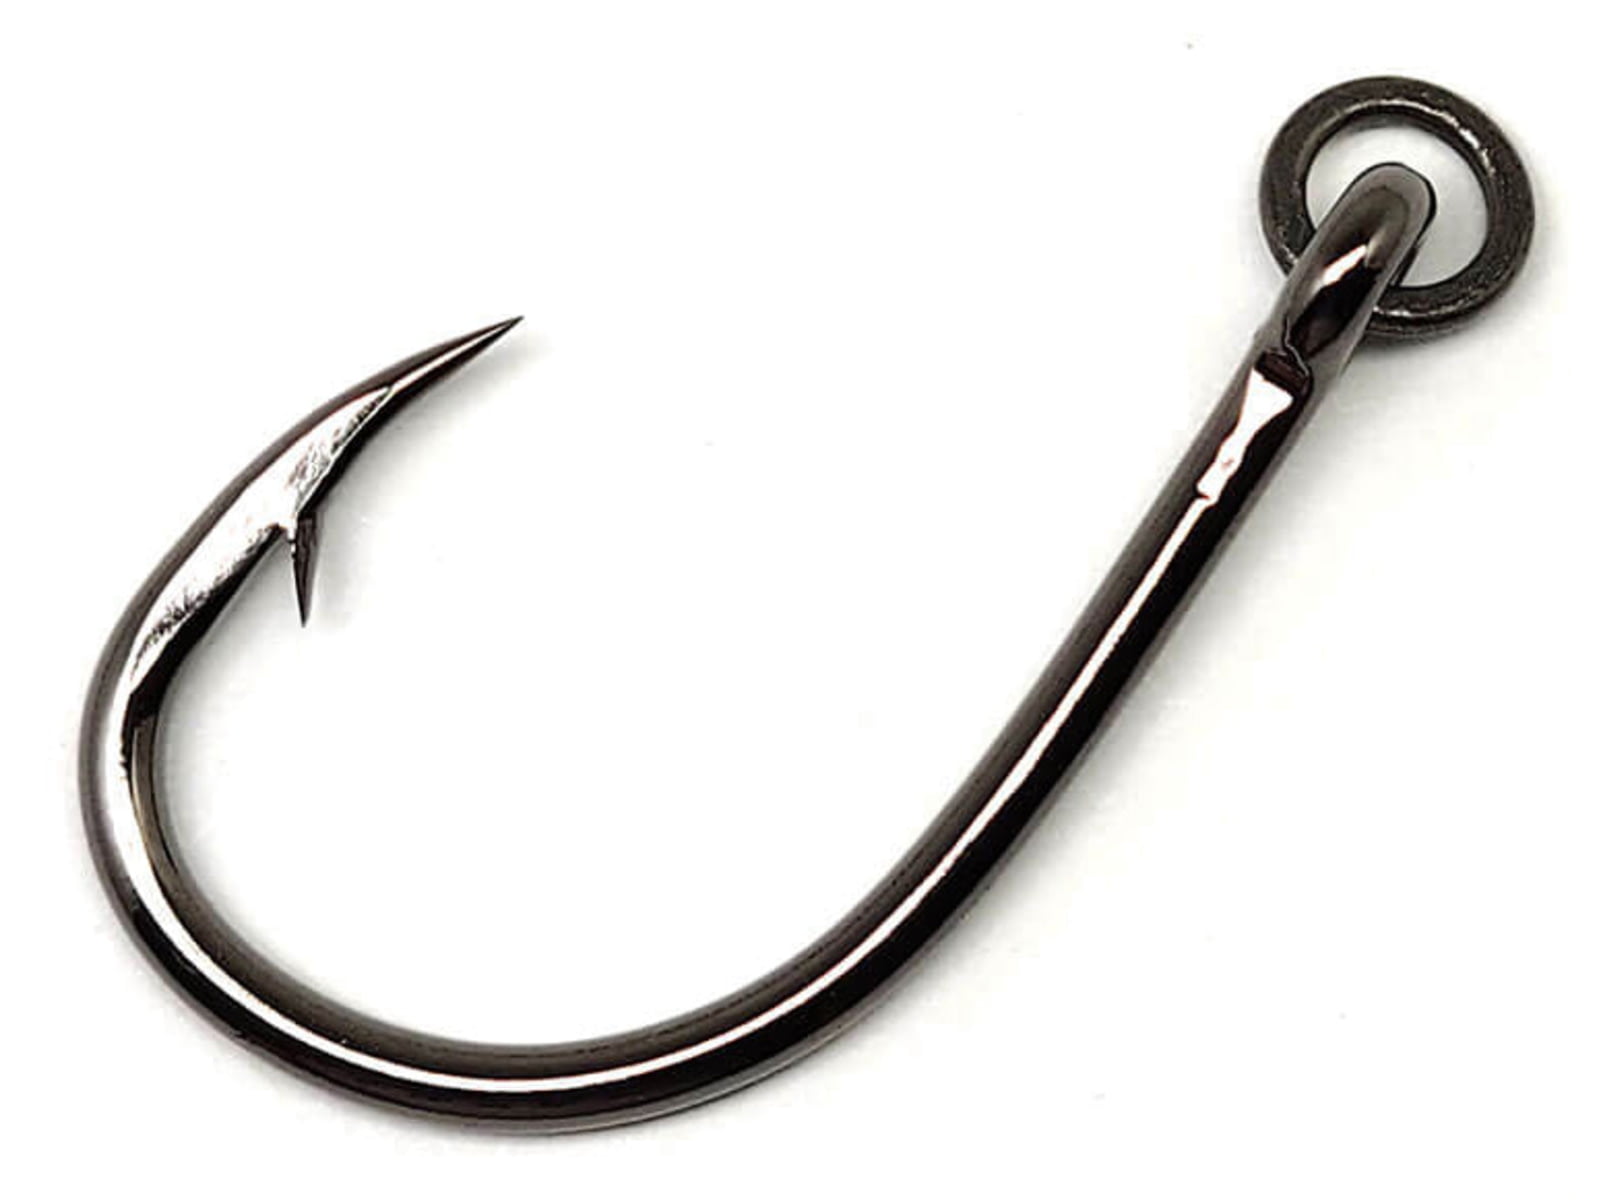 Gamakatsu Live Bait Hook with Solid Ring 